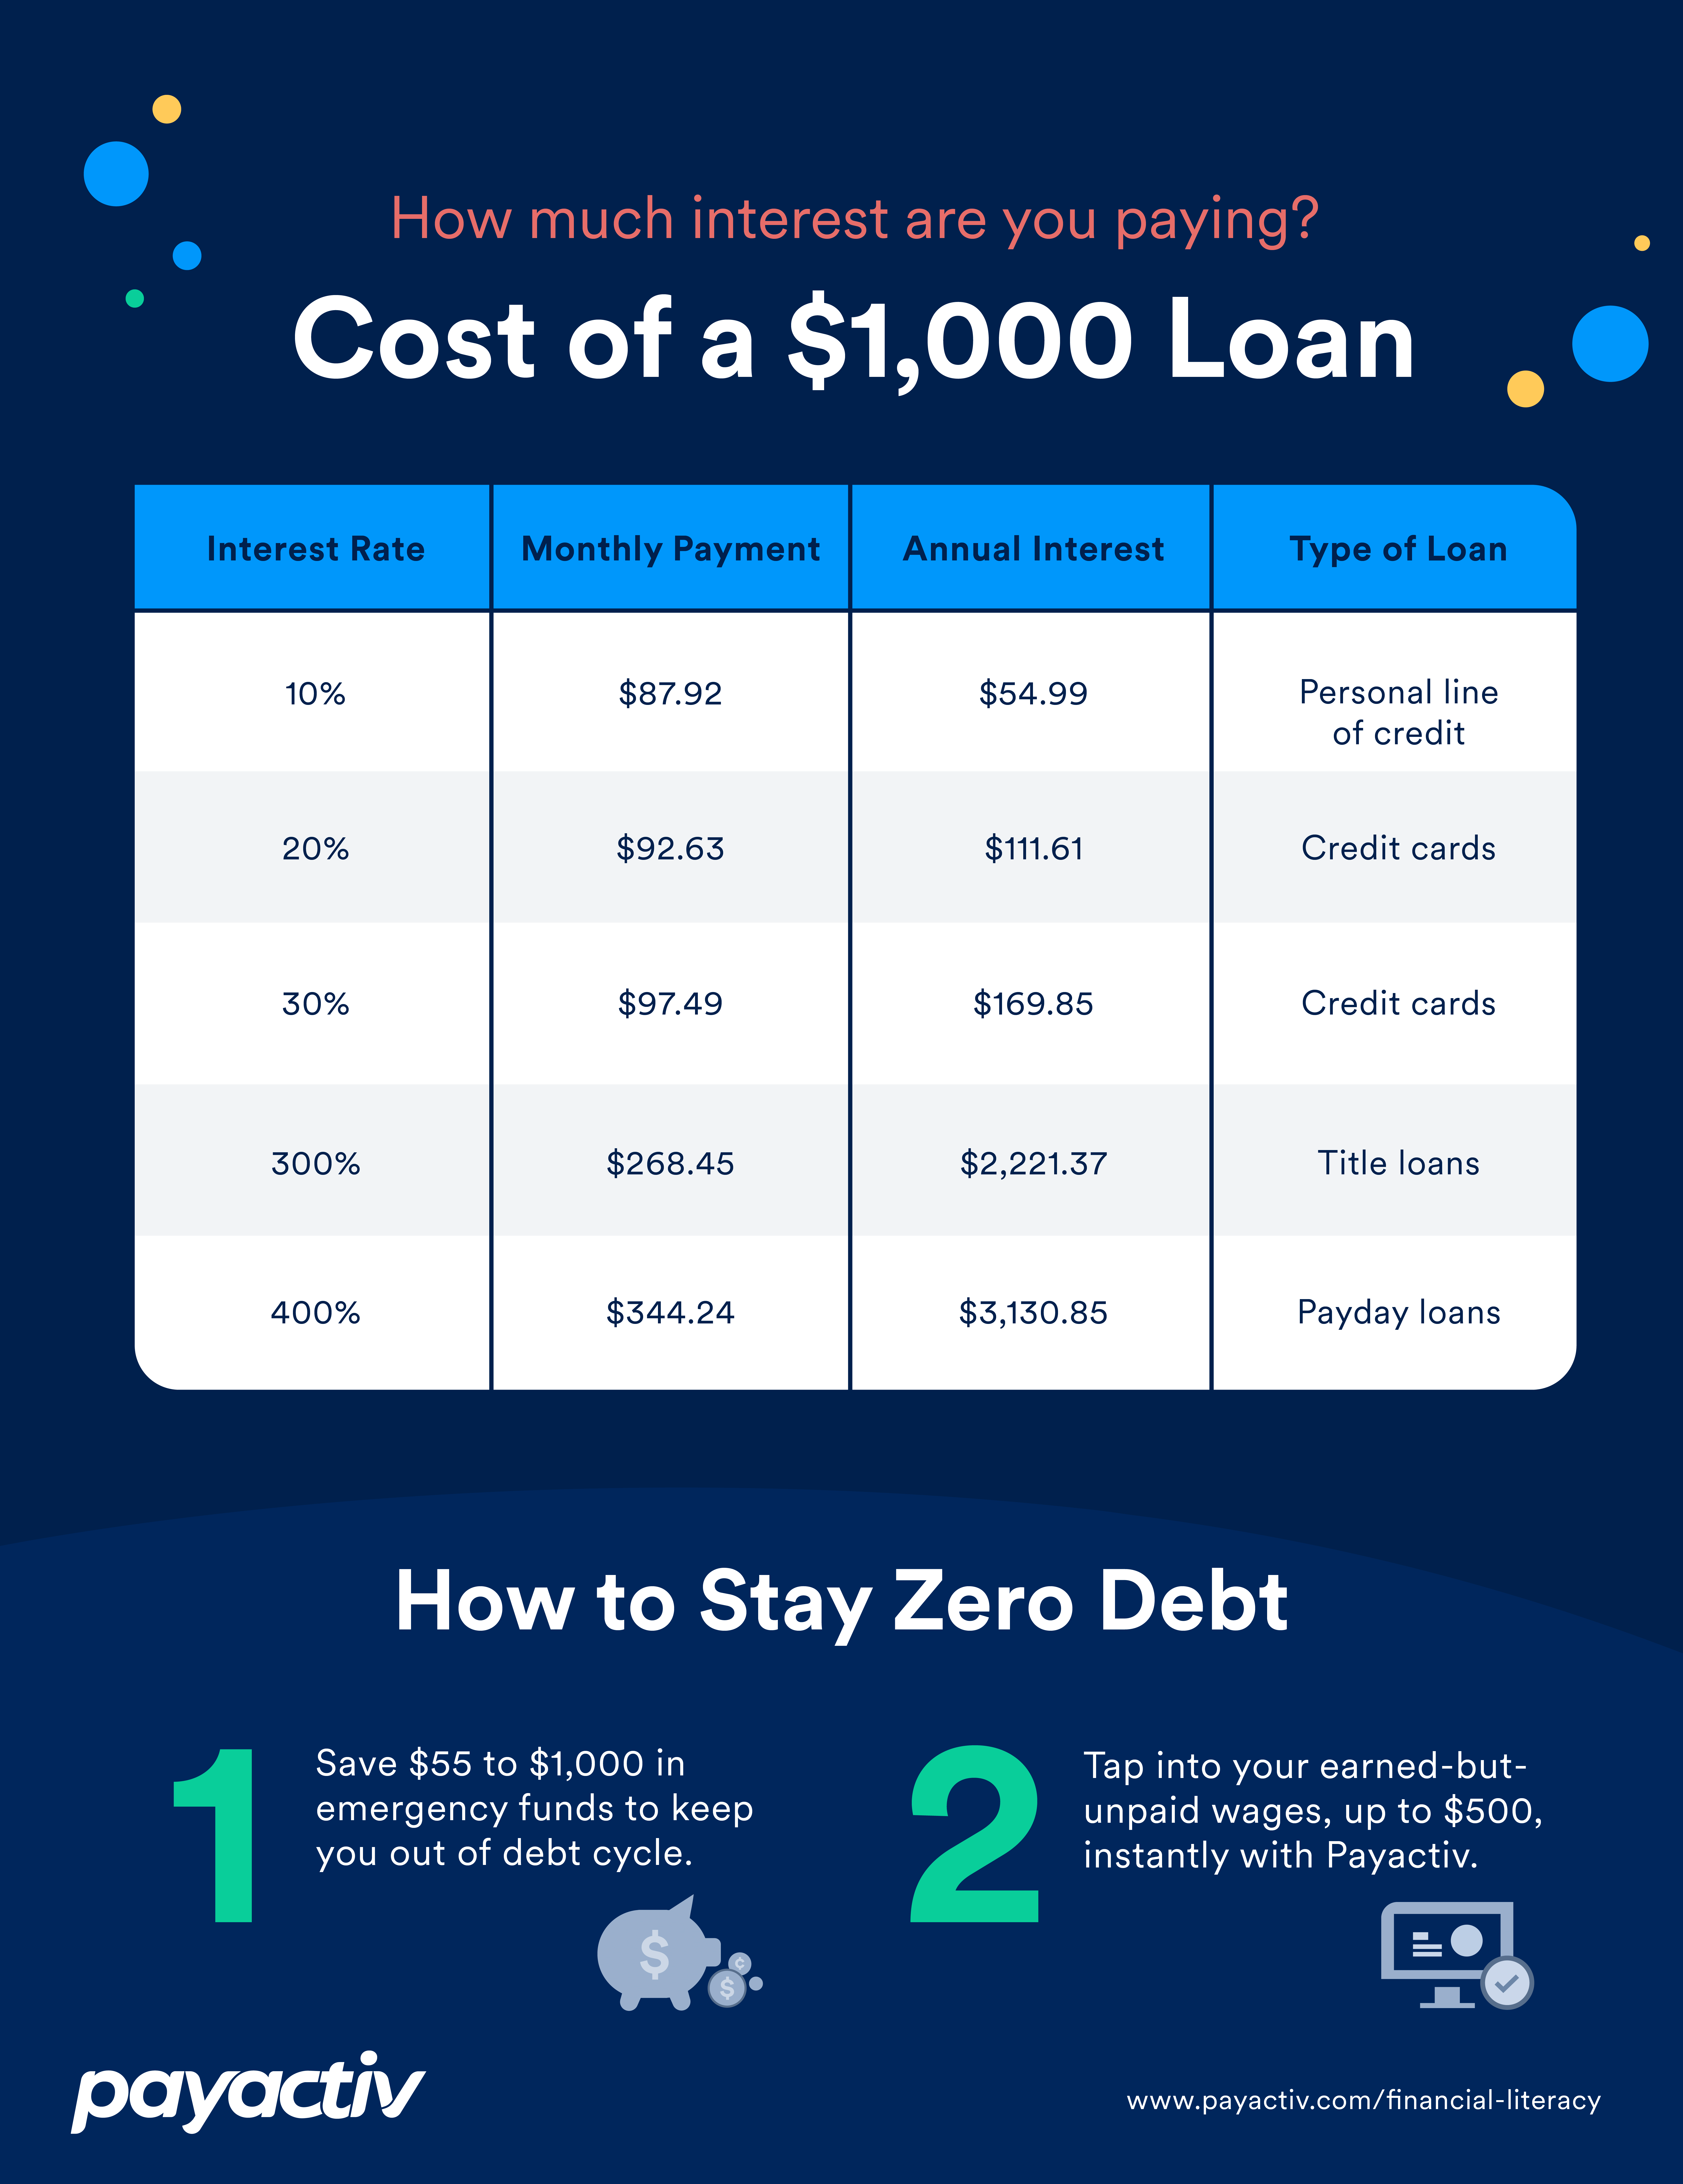 How Much Will a $1,000 Loan Cost You?